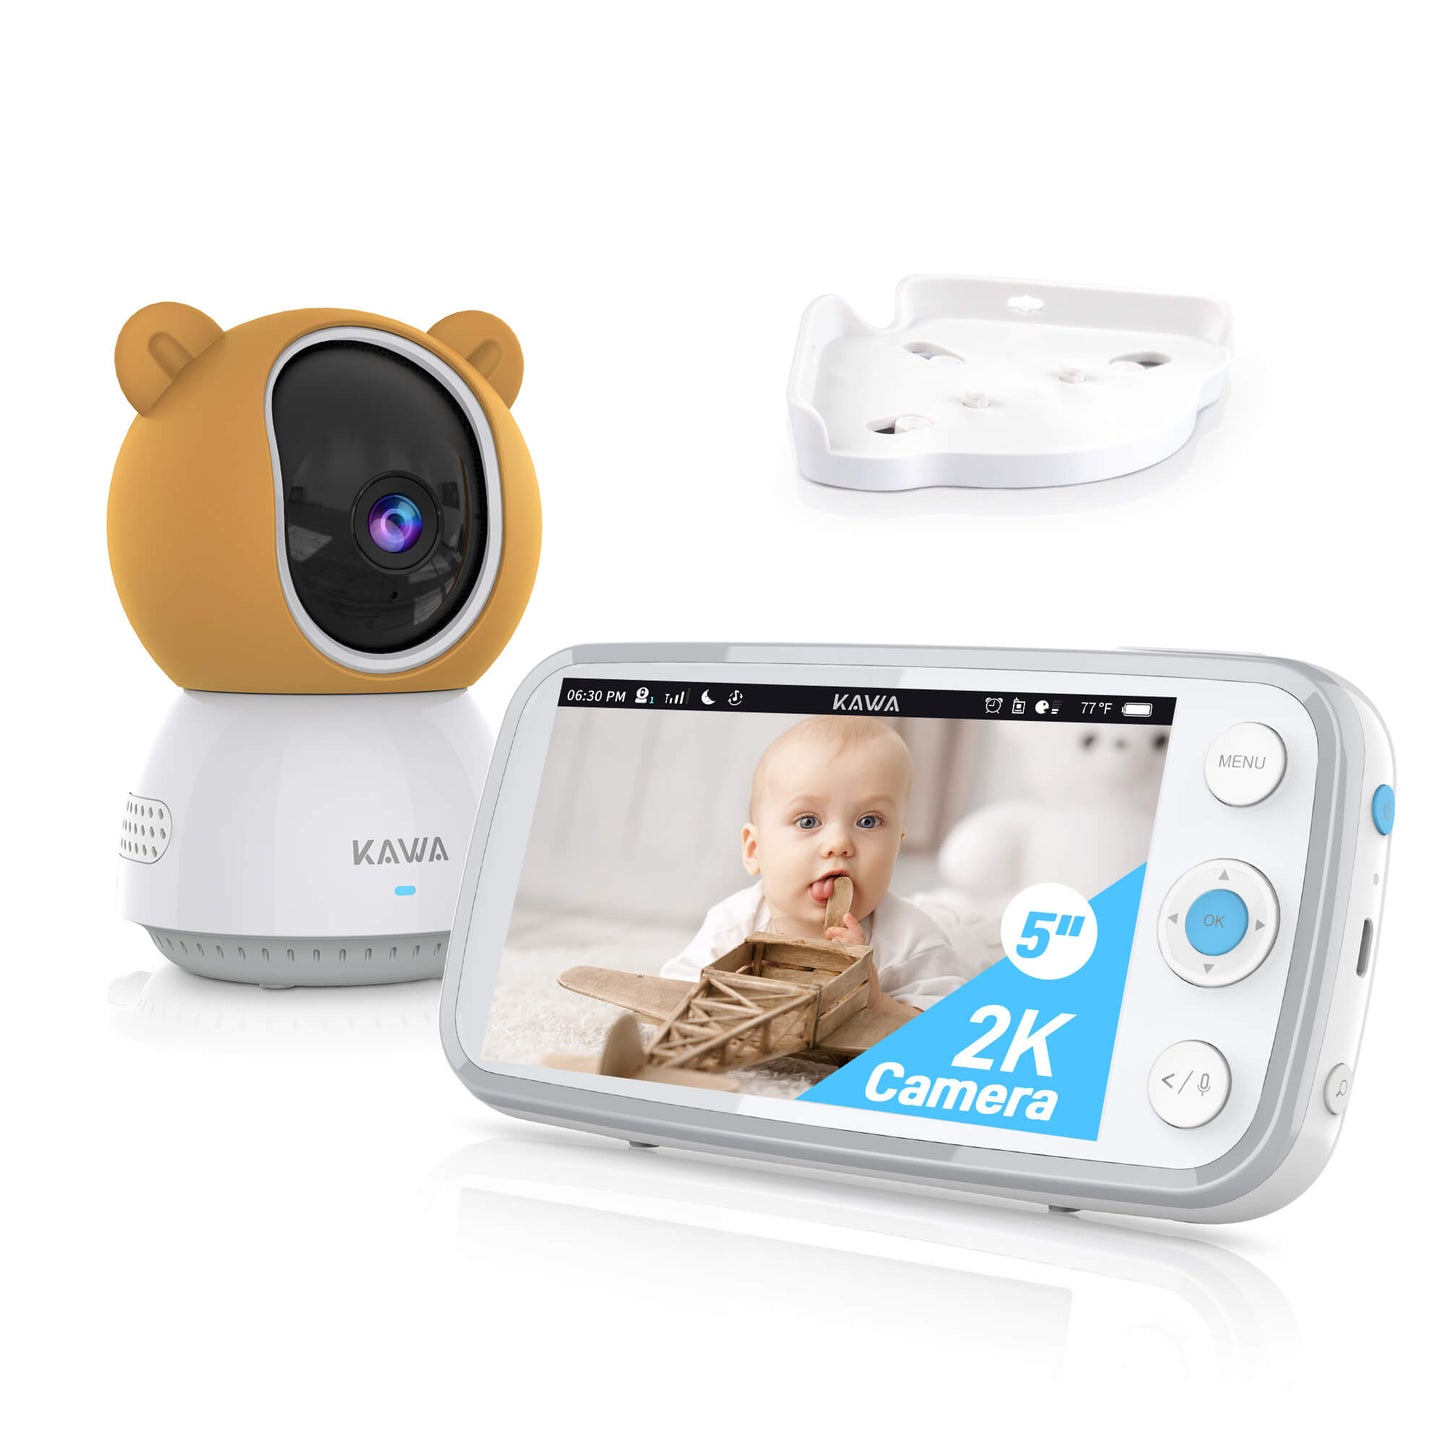 KAWA S7 | Baby Monitor with Camera and Audio - 2K QHD 5" HD Display Video Baby Monitor with Night Vision, Temperature Sensor, 2-Way Audio, Pan Tilt Zoom, White Noise, Lullaby, 20 Hours Battery Life, 1000ft Range